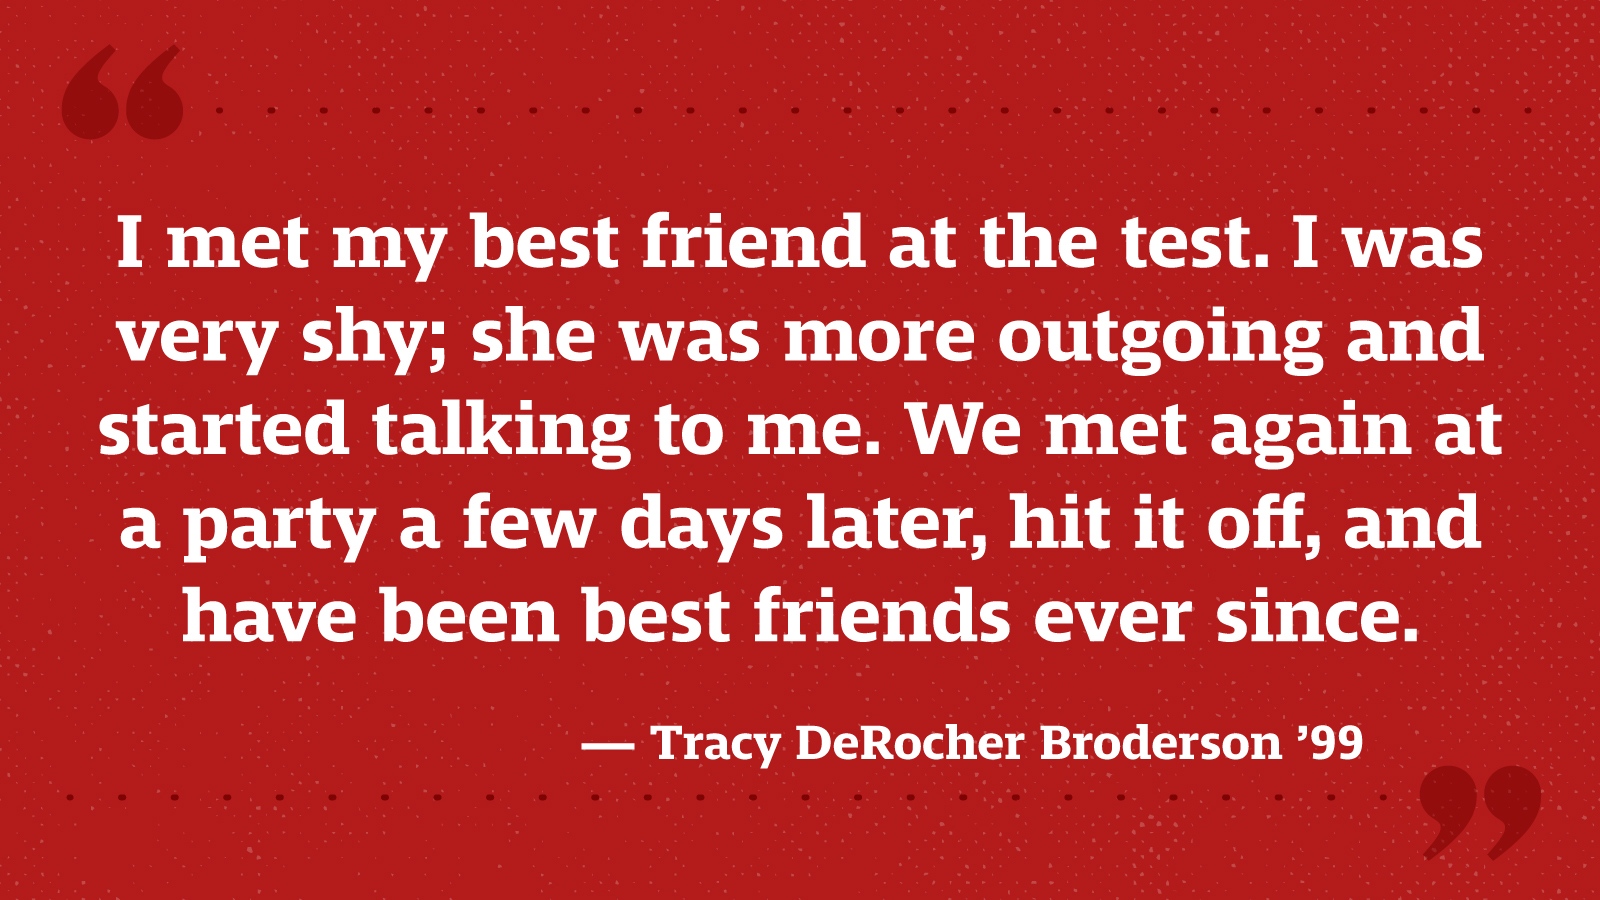 I met my best friend at the test. I was very shy; she was more outgoing and started talking to me. We met again at a party a few days later, hit it off, and have been best friends ever since. — Tracy DeRocher Broderson ’99